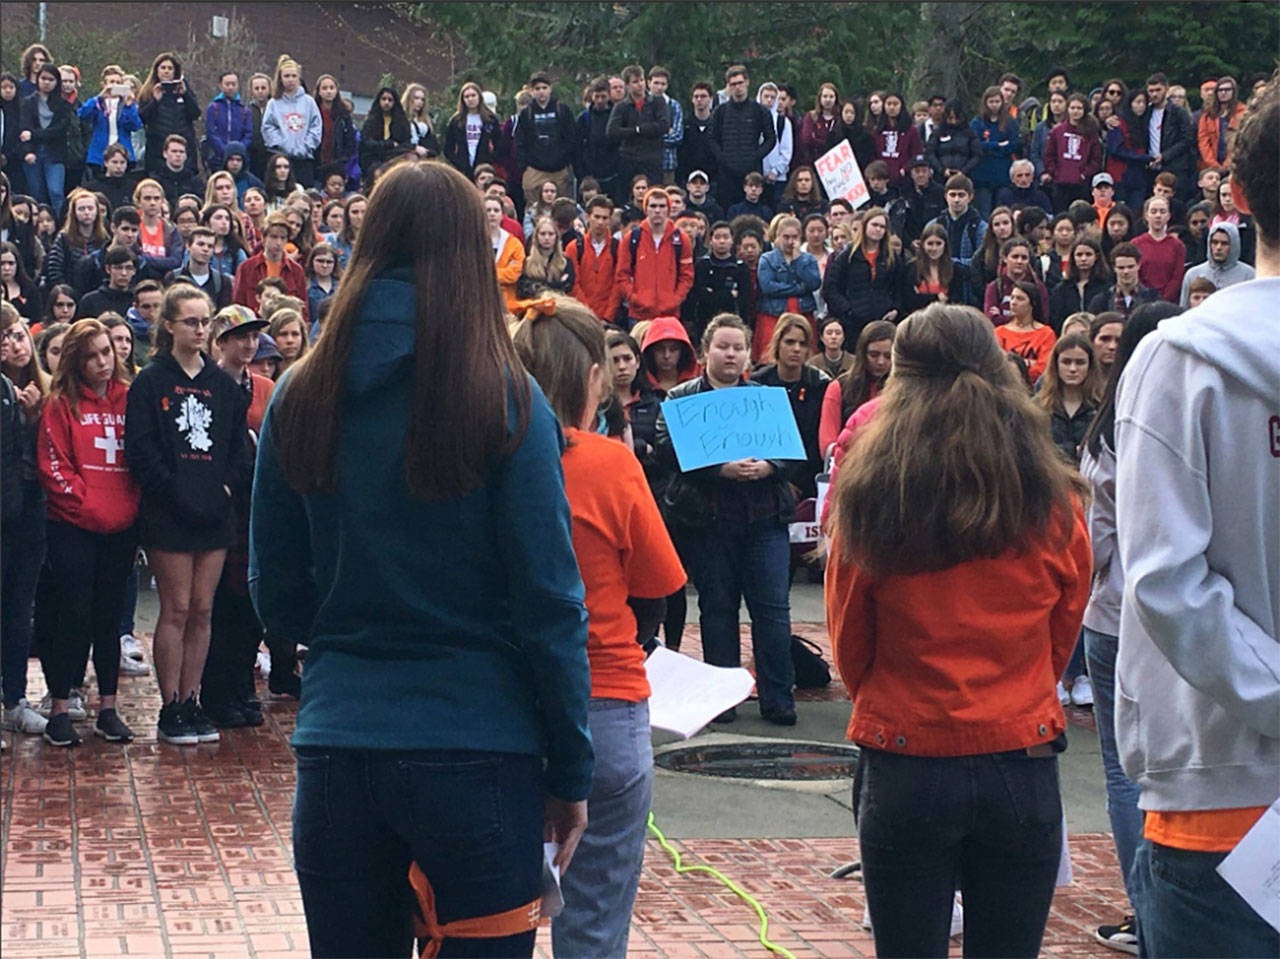 Rep. Tana Senn captured the scene as Mercer Island High School students participated in a walkout for gun control on March 14. The city of Mercer Island declared that June 1 will be National Gun Violence Awareness Day. Photo via Twitter